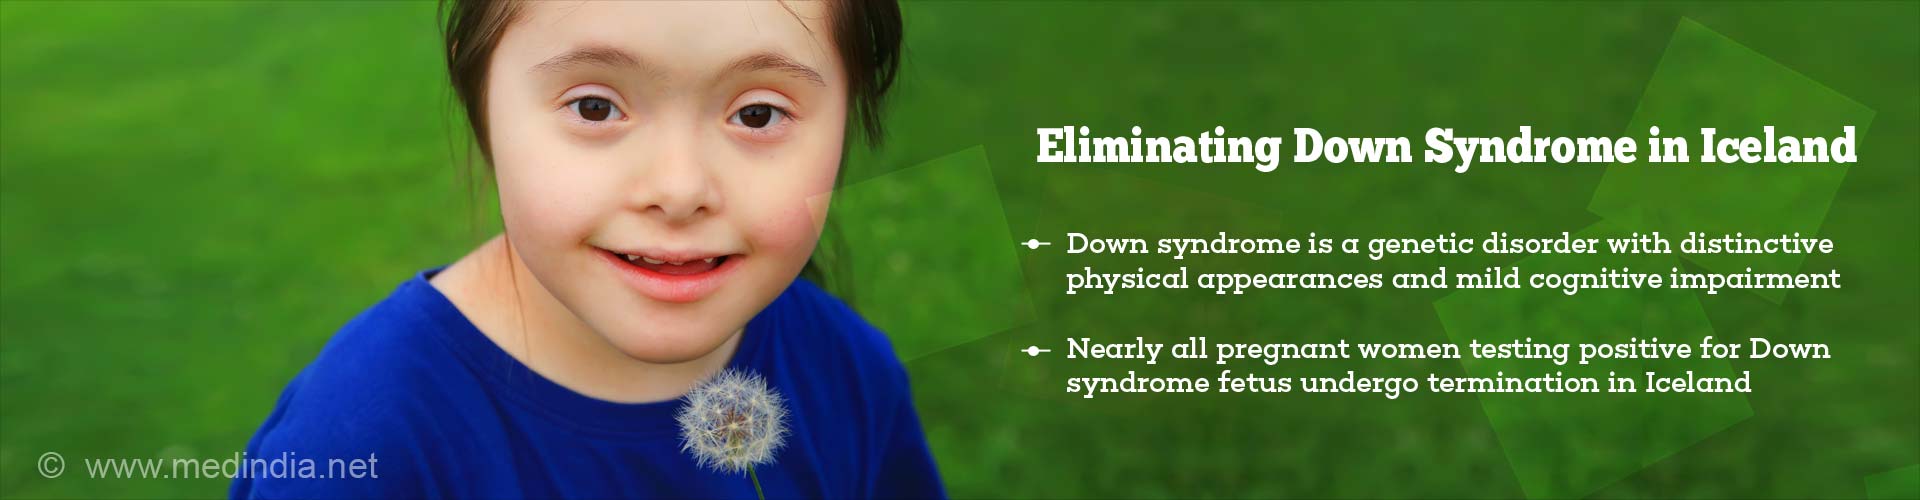 Eliminating Down Syndrome in Iceland
- Down syndrome is a genetic disorder with distinctive physical appearance and mild cognitive impairment
- Nearly all pregnant women testing positive for Down syndrome fetus undergo termination in Iceland